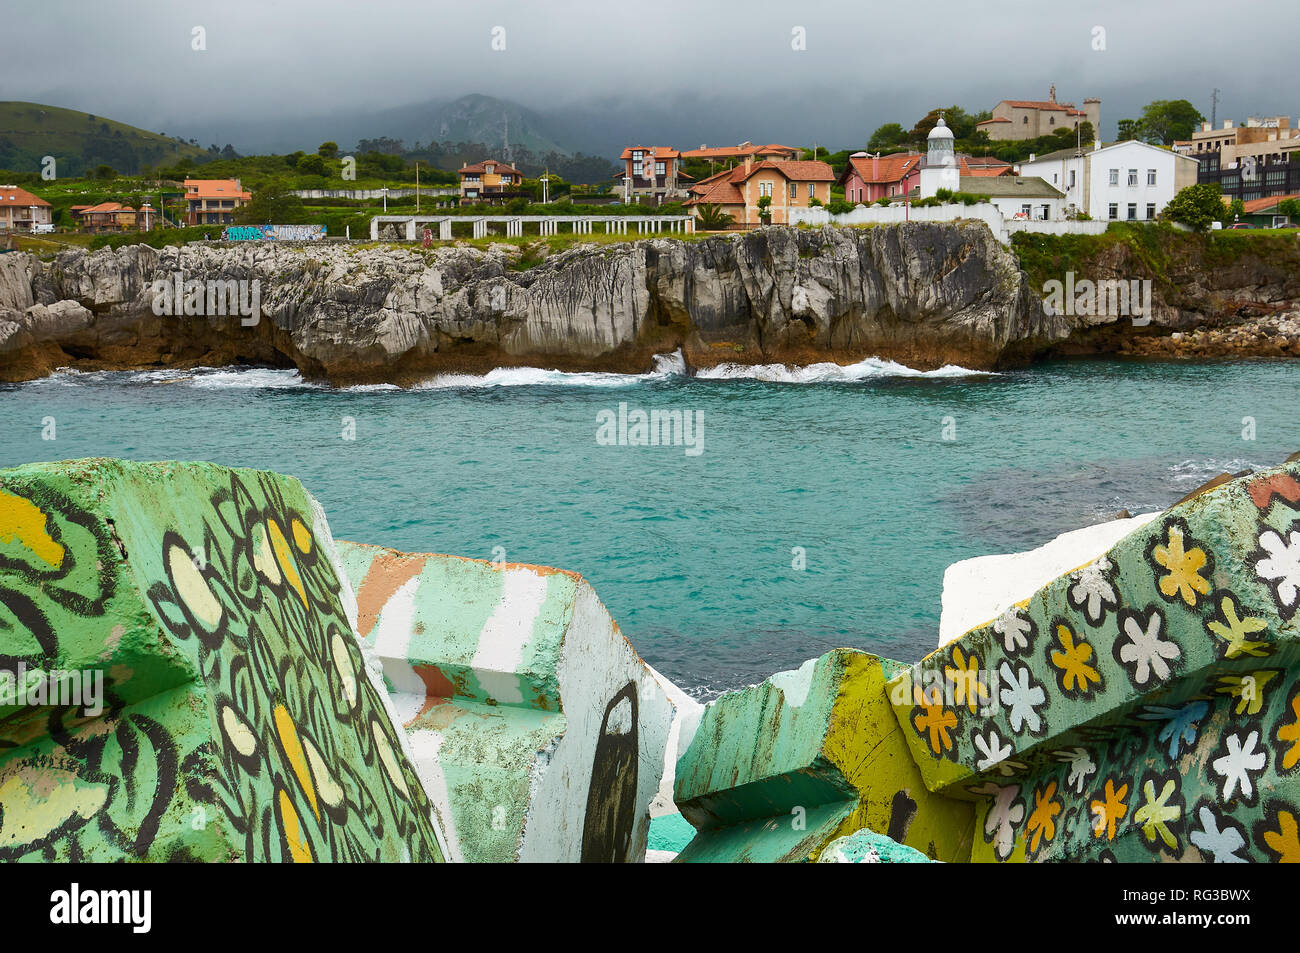 Cubos de la Memoria, artistic intervention from Agustín Ibarrola of painted concrete blocks with town in the back in Llanes harbour (Asturias, Spain) Stock Photo